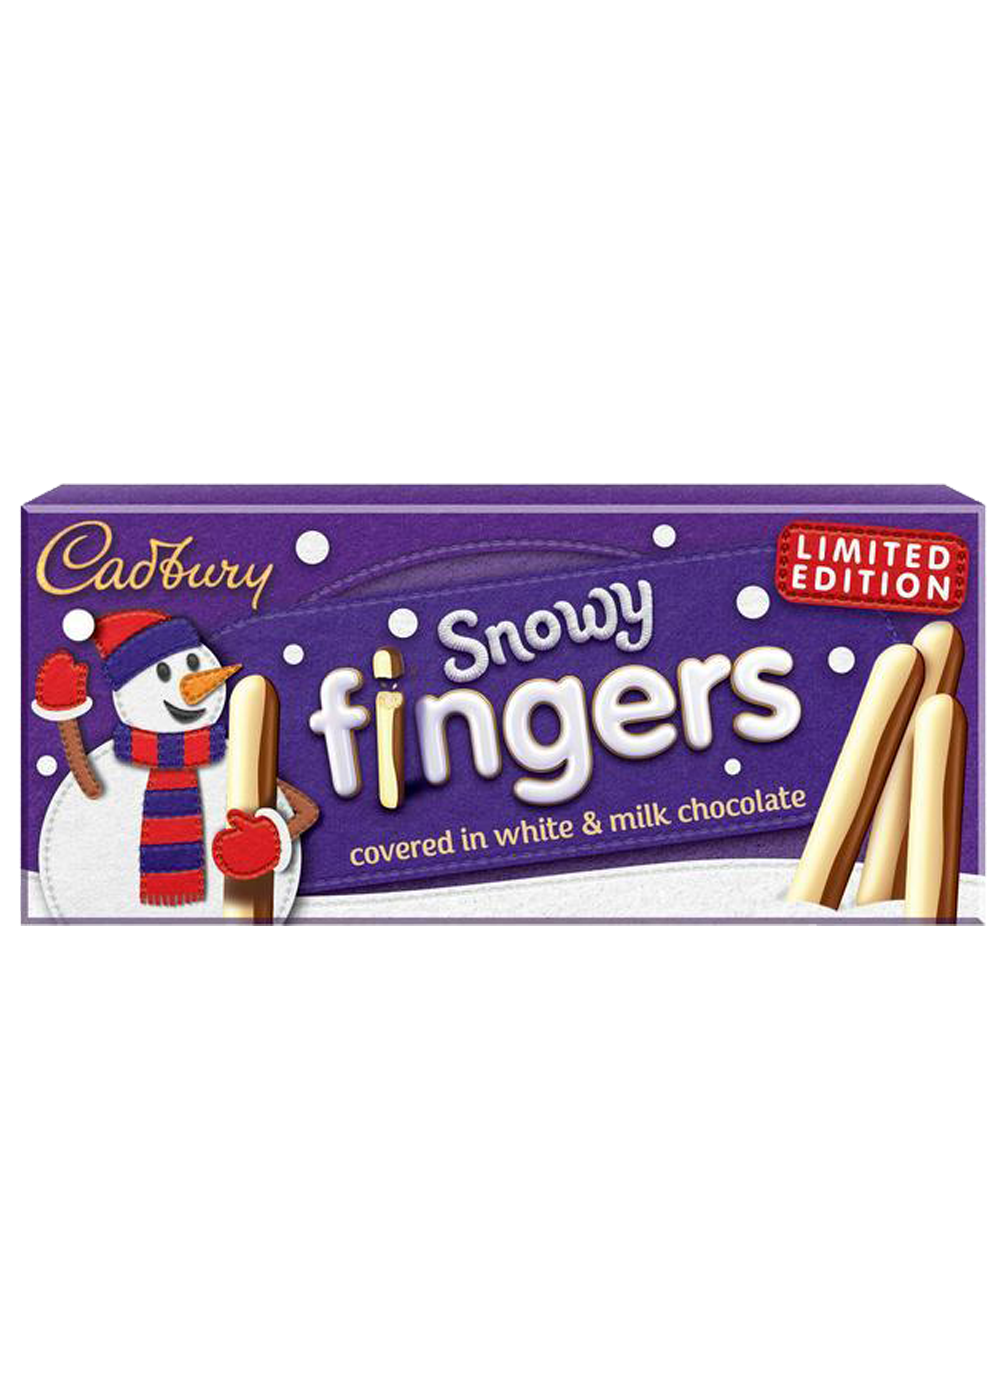 Cadbury Snowy Fingers covered in white & milk choco 115g (Limited Edition)